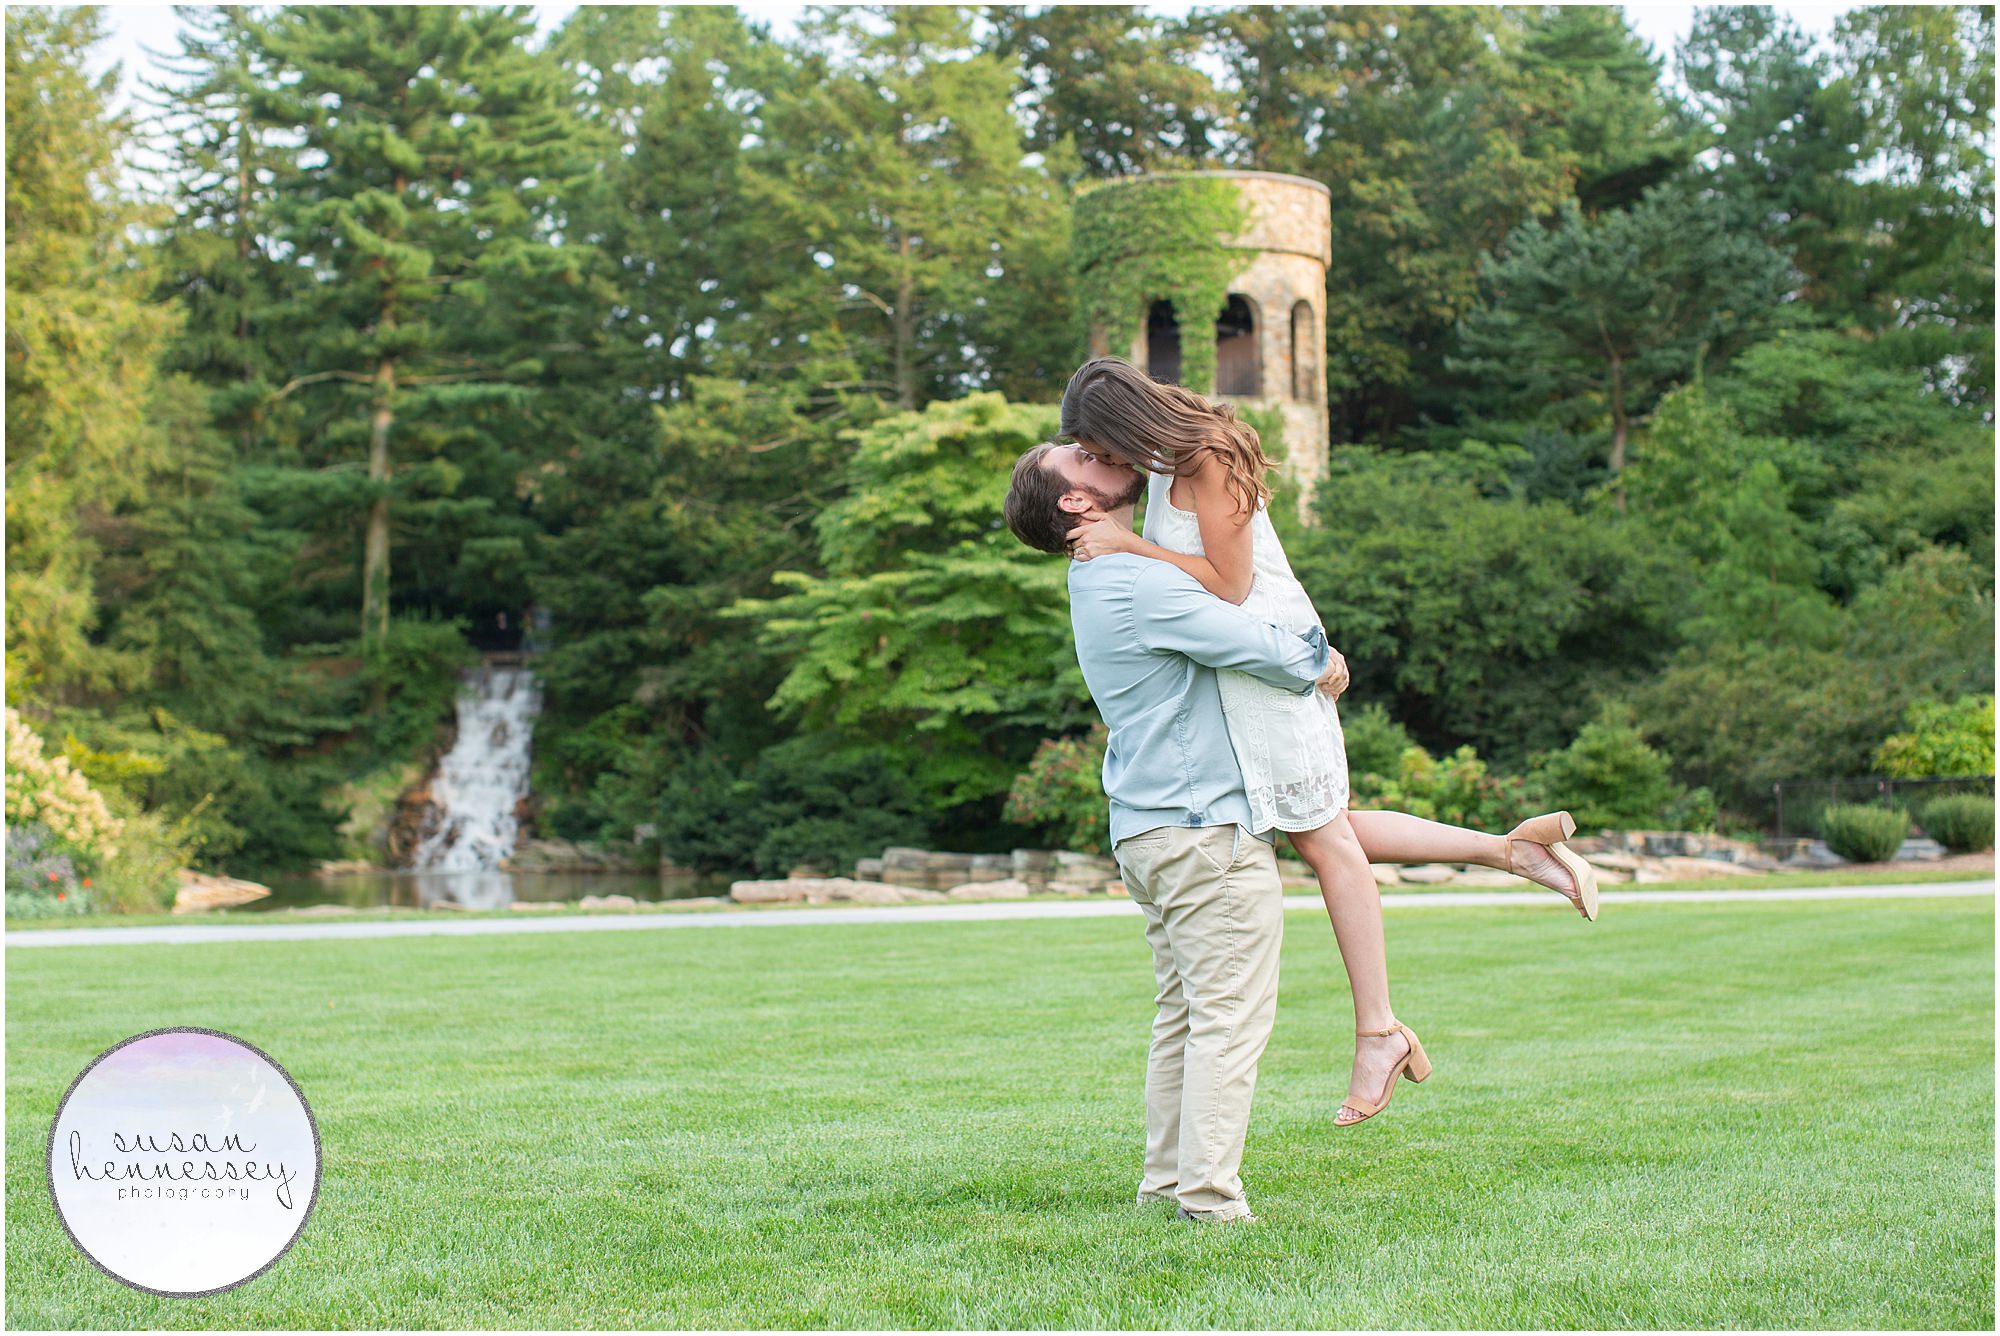 A romantic image from a couple's engagement session at Longwood Gardens